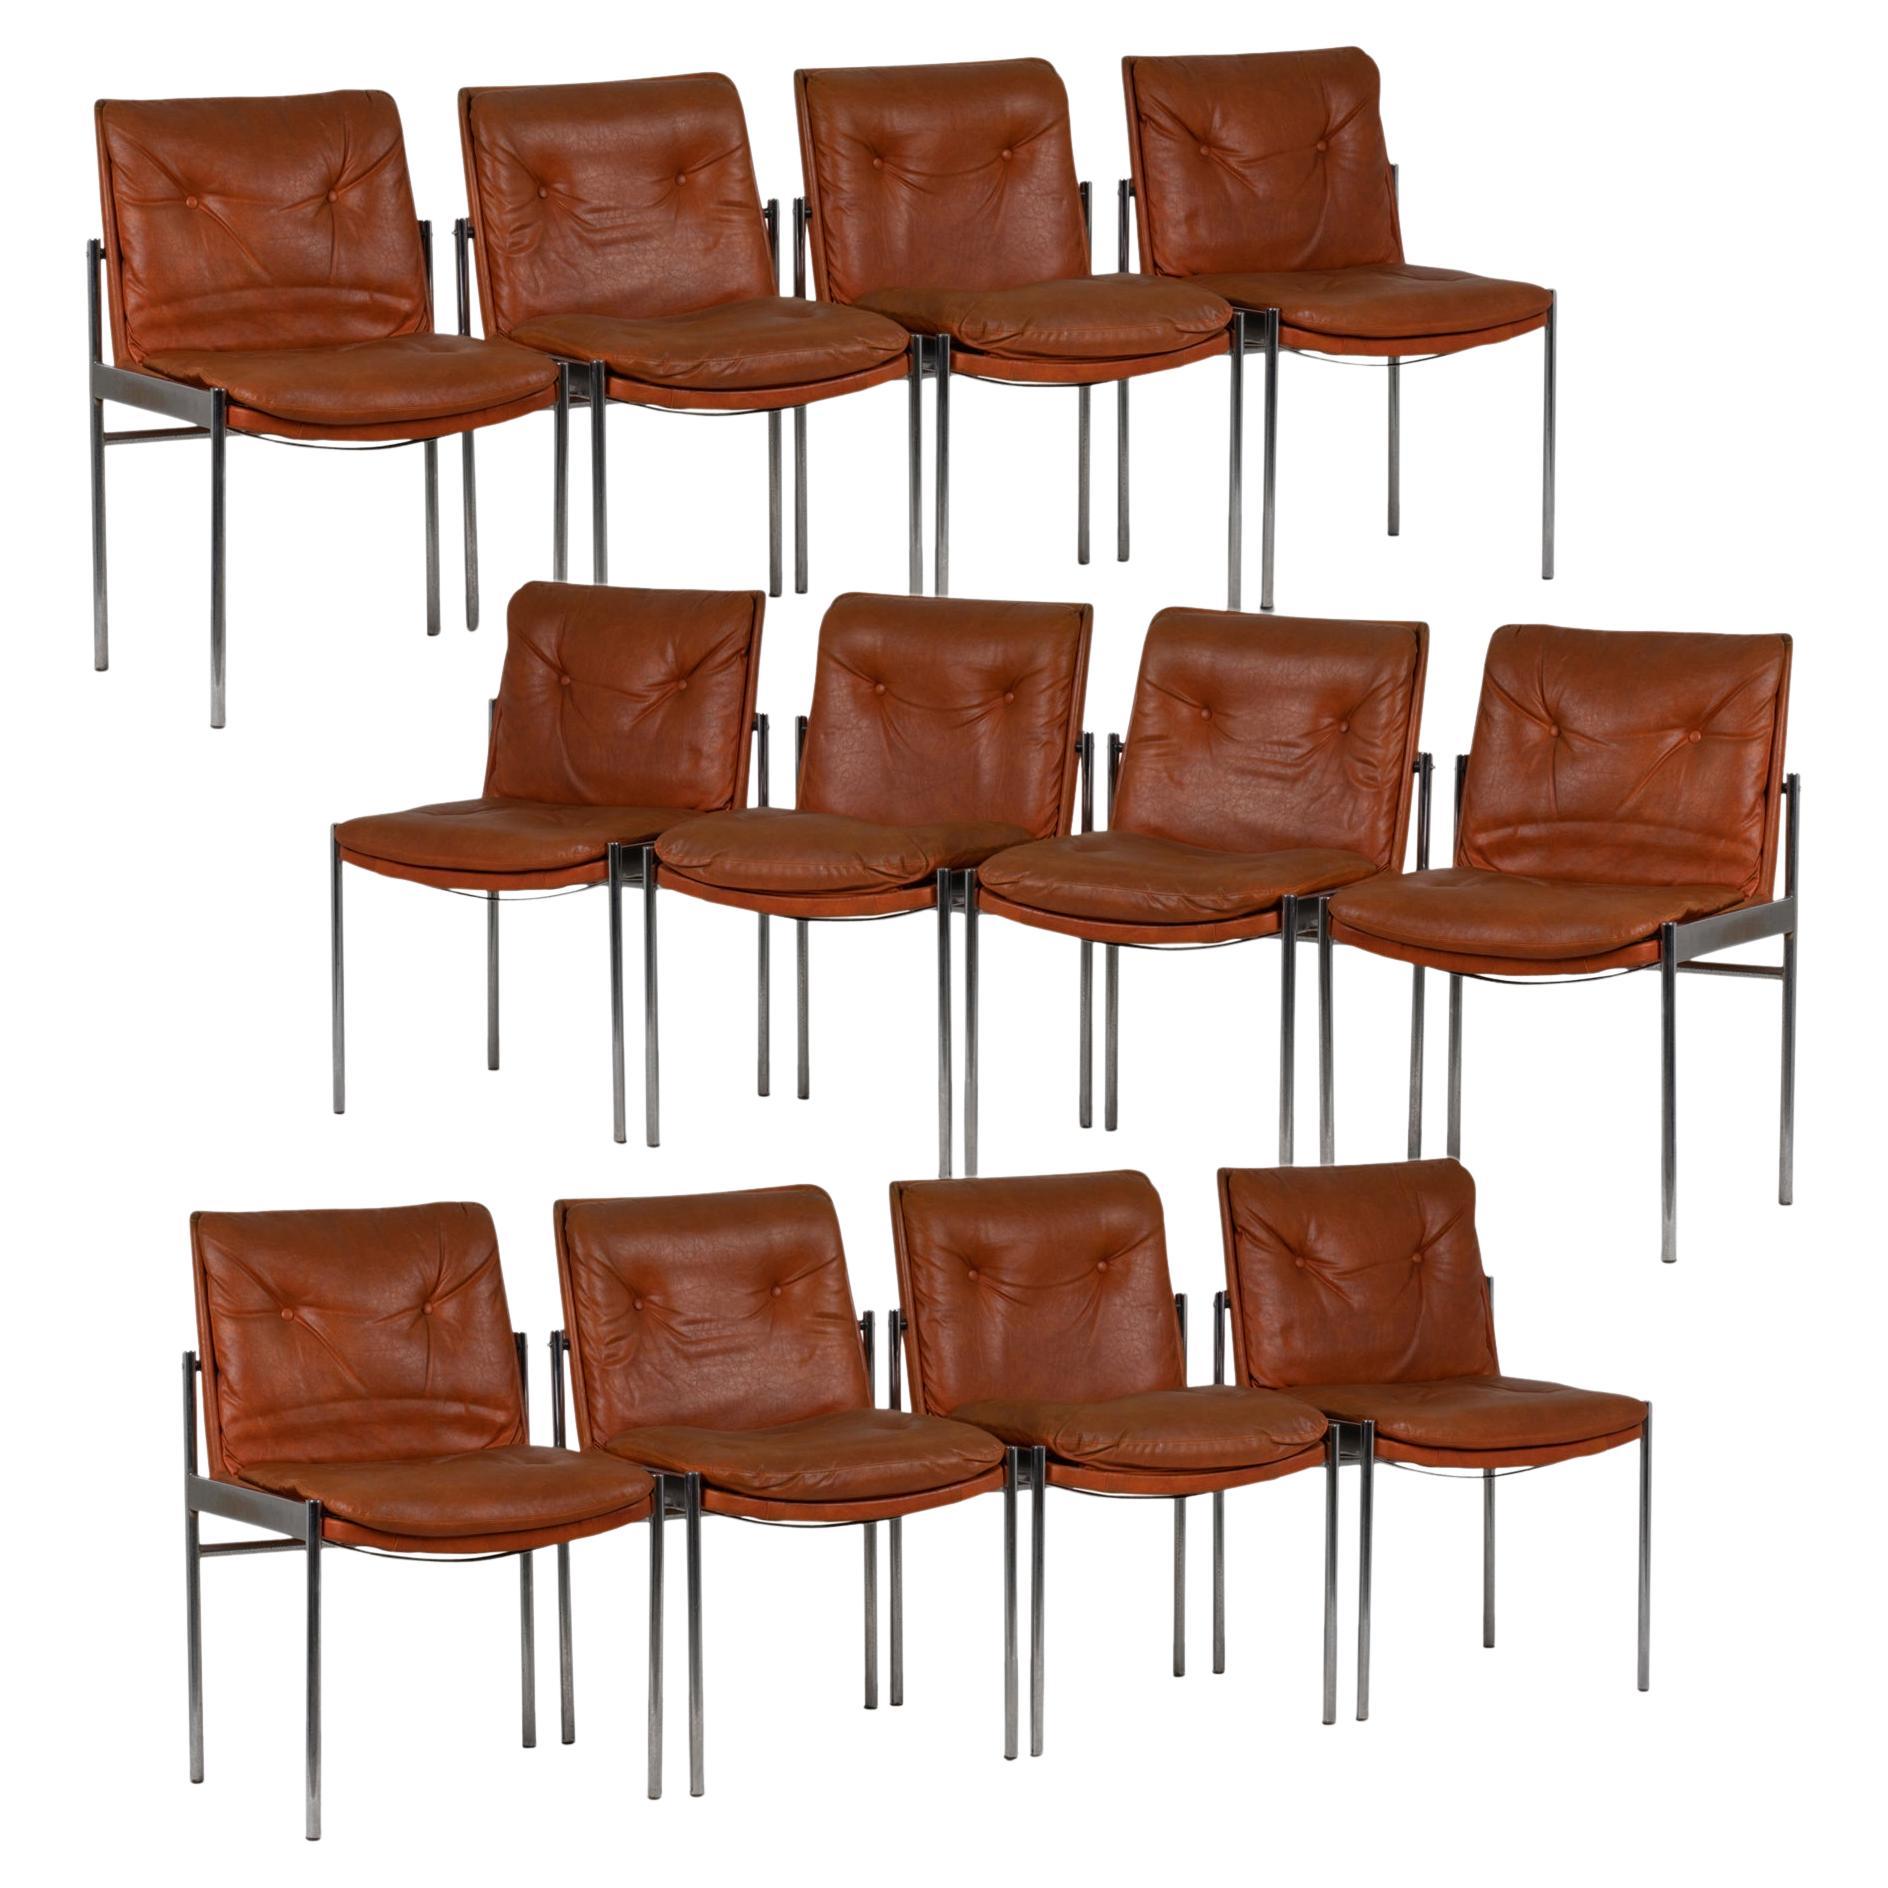 Series of Twelve Chairs in Leather and Chromed Metal, 1970s For Sale